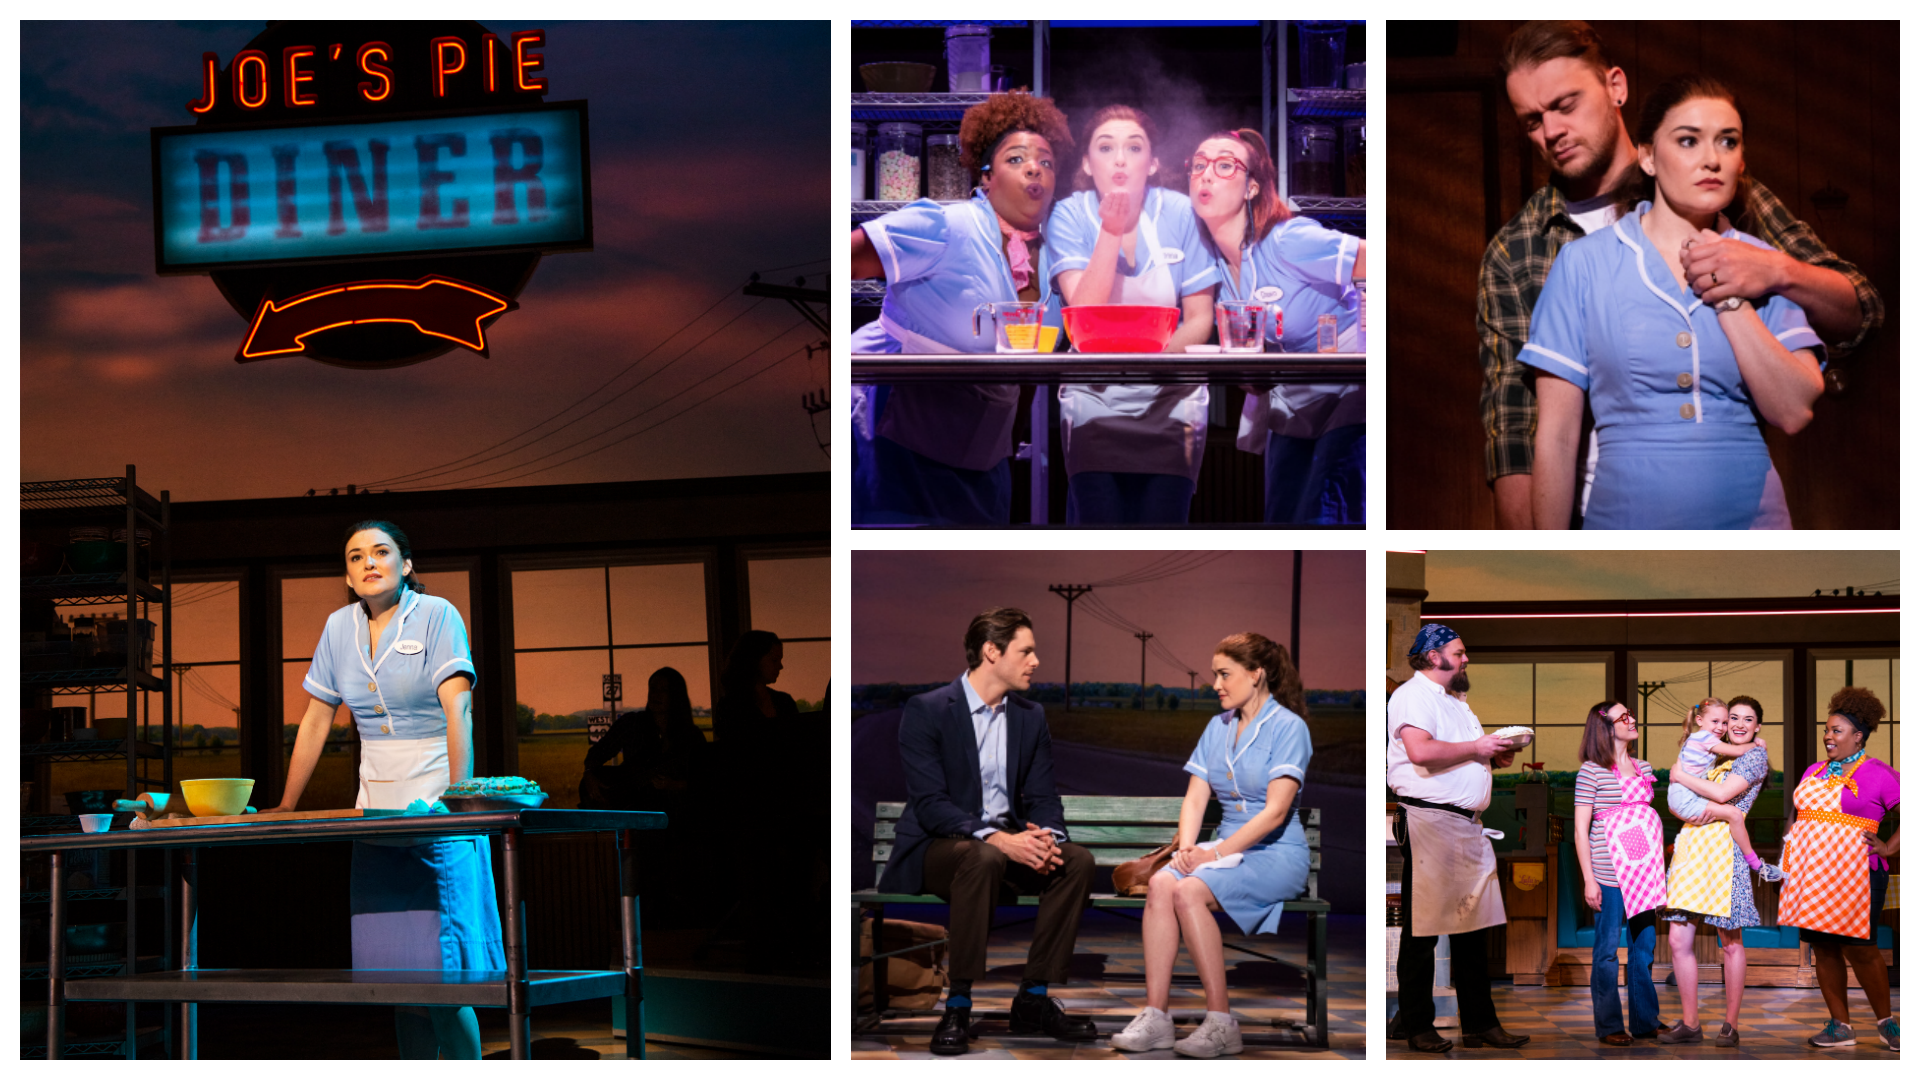 Scenes from Waitress The Musical and Joe's Pie Diner. Christine Dwyer, Maiesha McQueen, Ephie Aardema, Steven Good, Norah Morley.